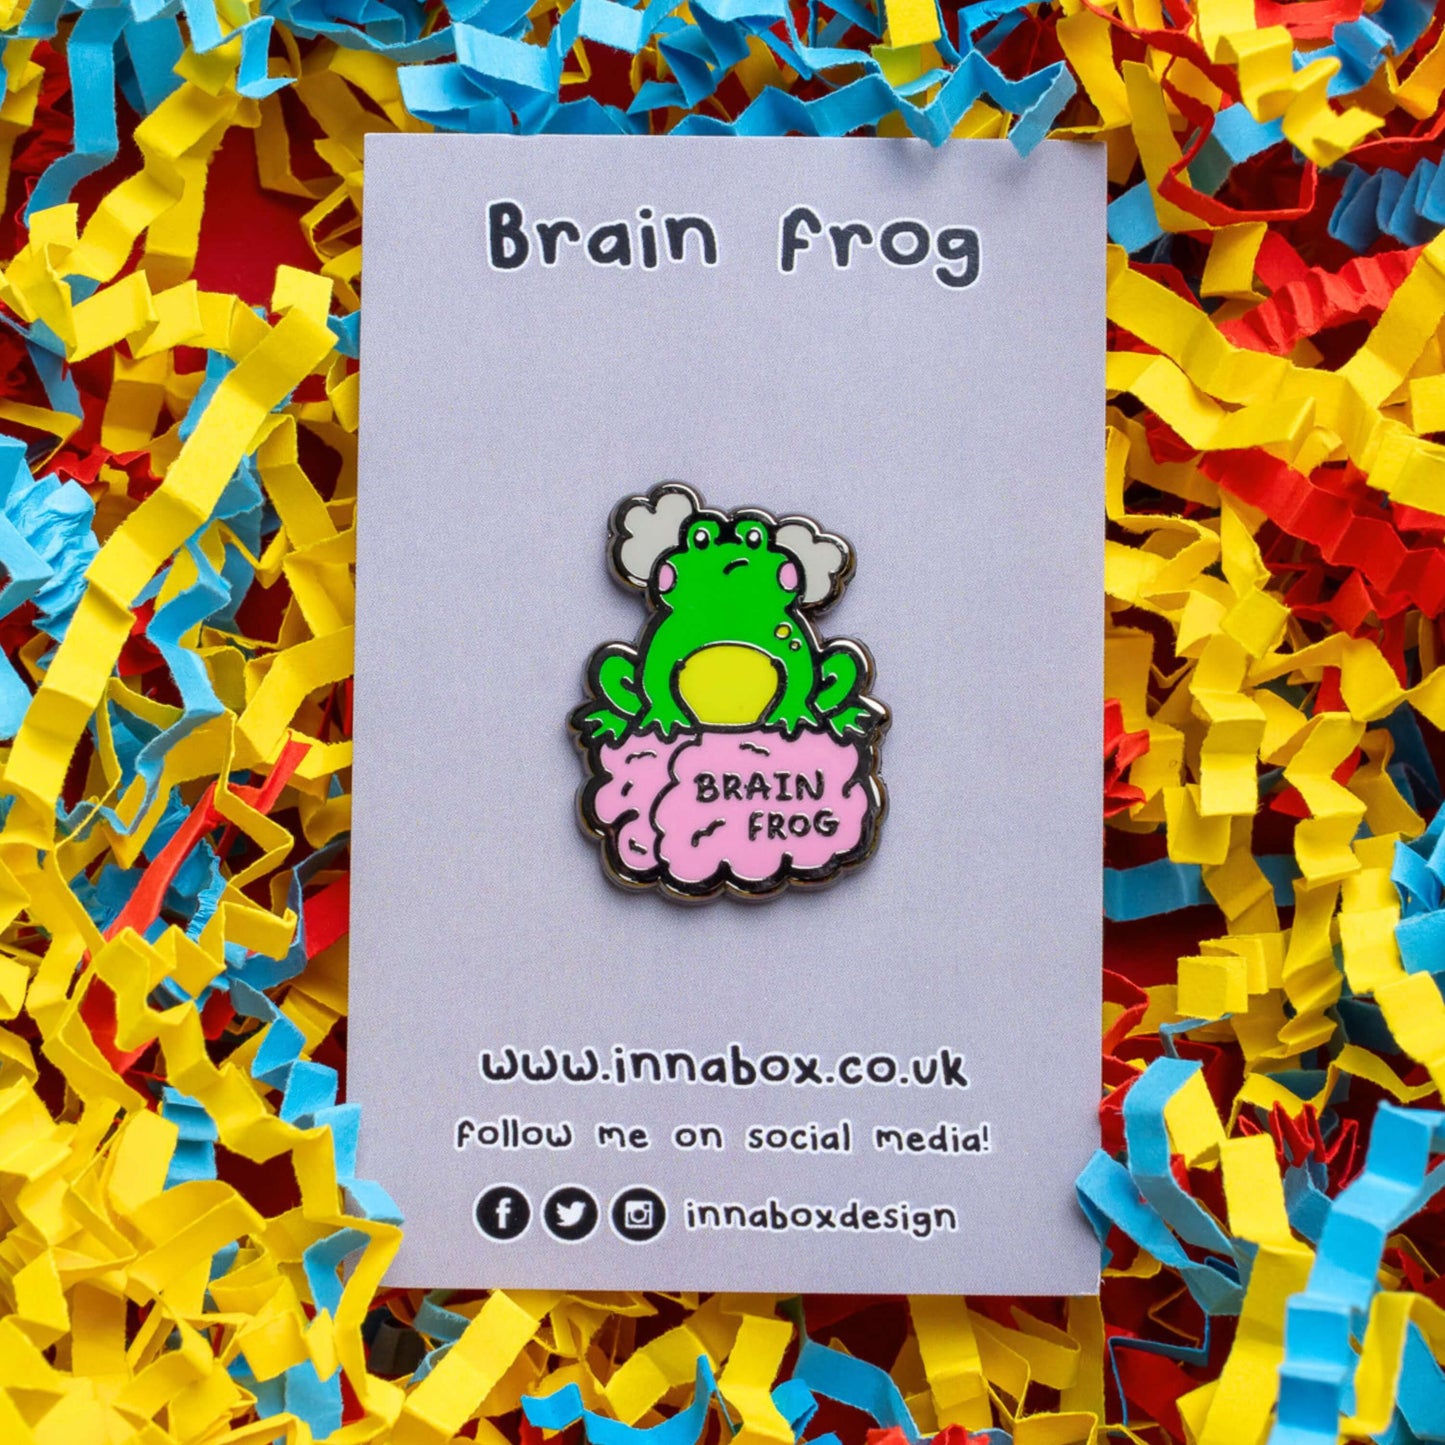 The Brain Frog Enamel Pin - Brain Fog on its grey backing card laid on a blue, yellow and red confetti card background. The pin is of a green frog with pink blush cheeks looking confused with two grey clouds by its head, it is sat on a pink brain with the text reading Brain Frog. The design is raising awareness for brain fog.